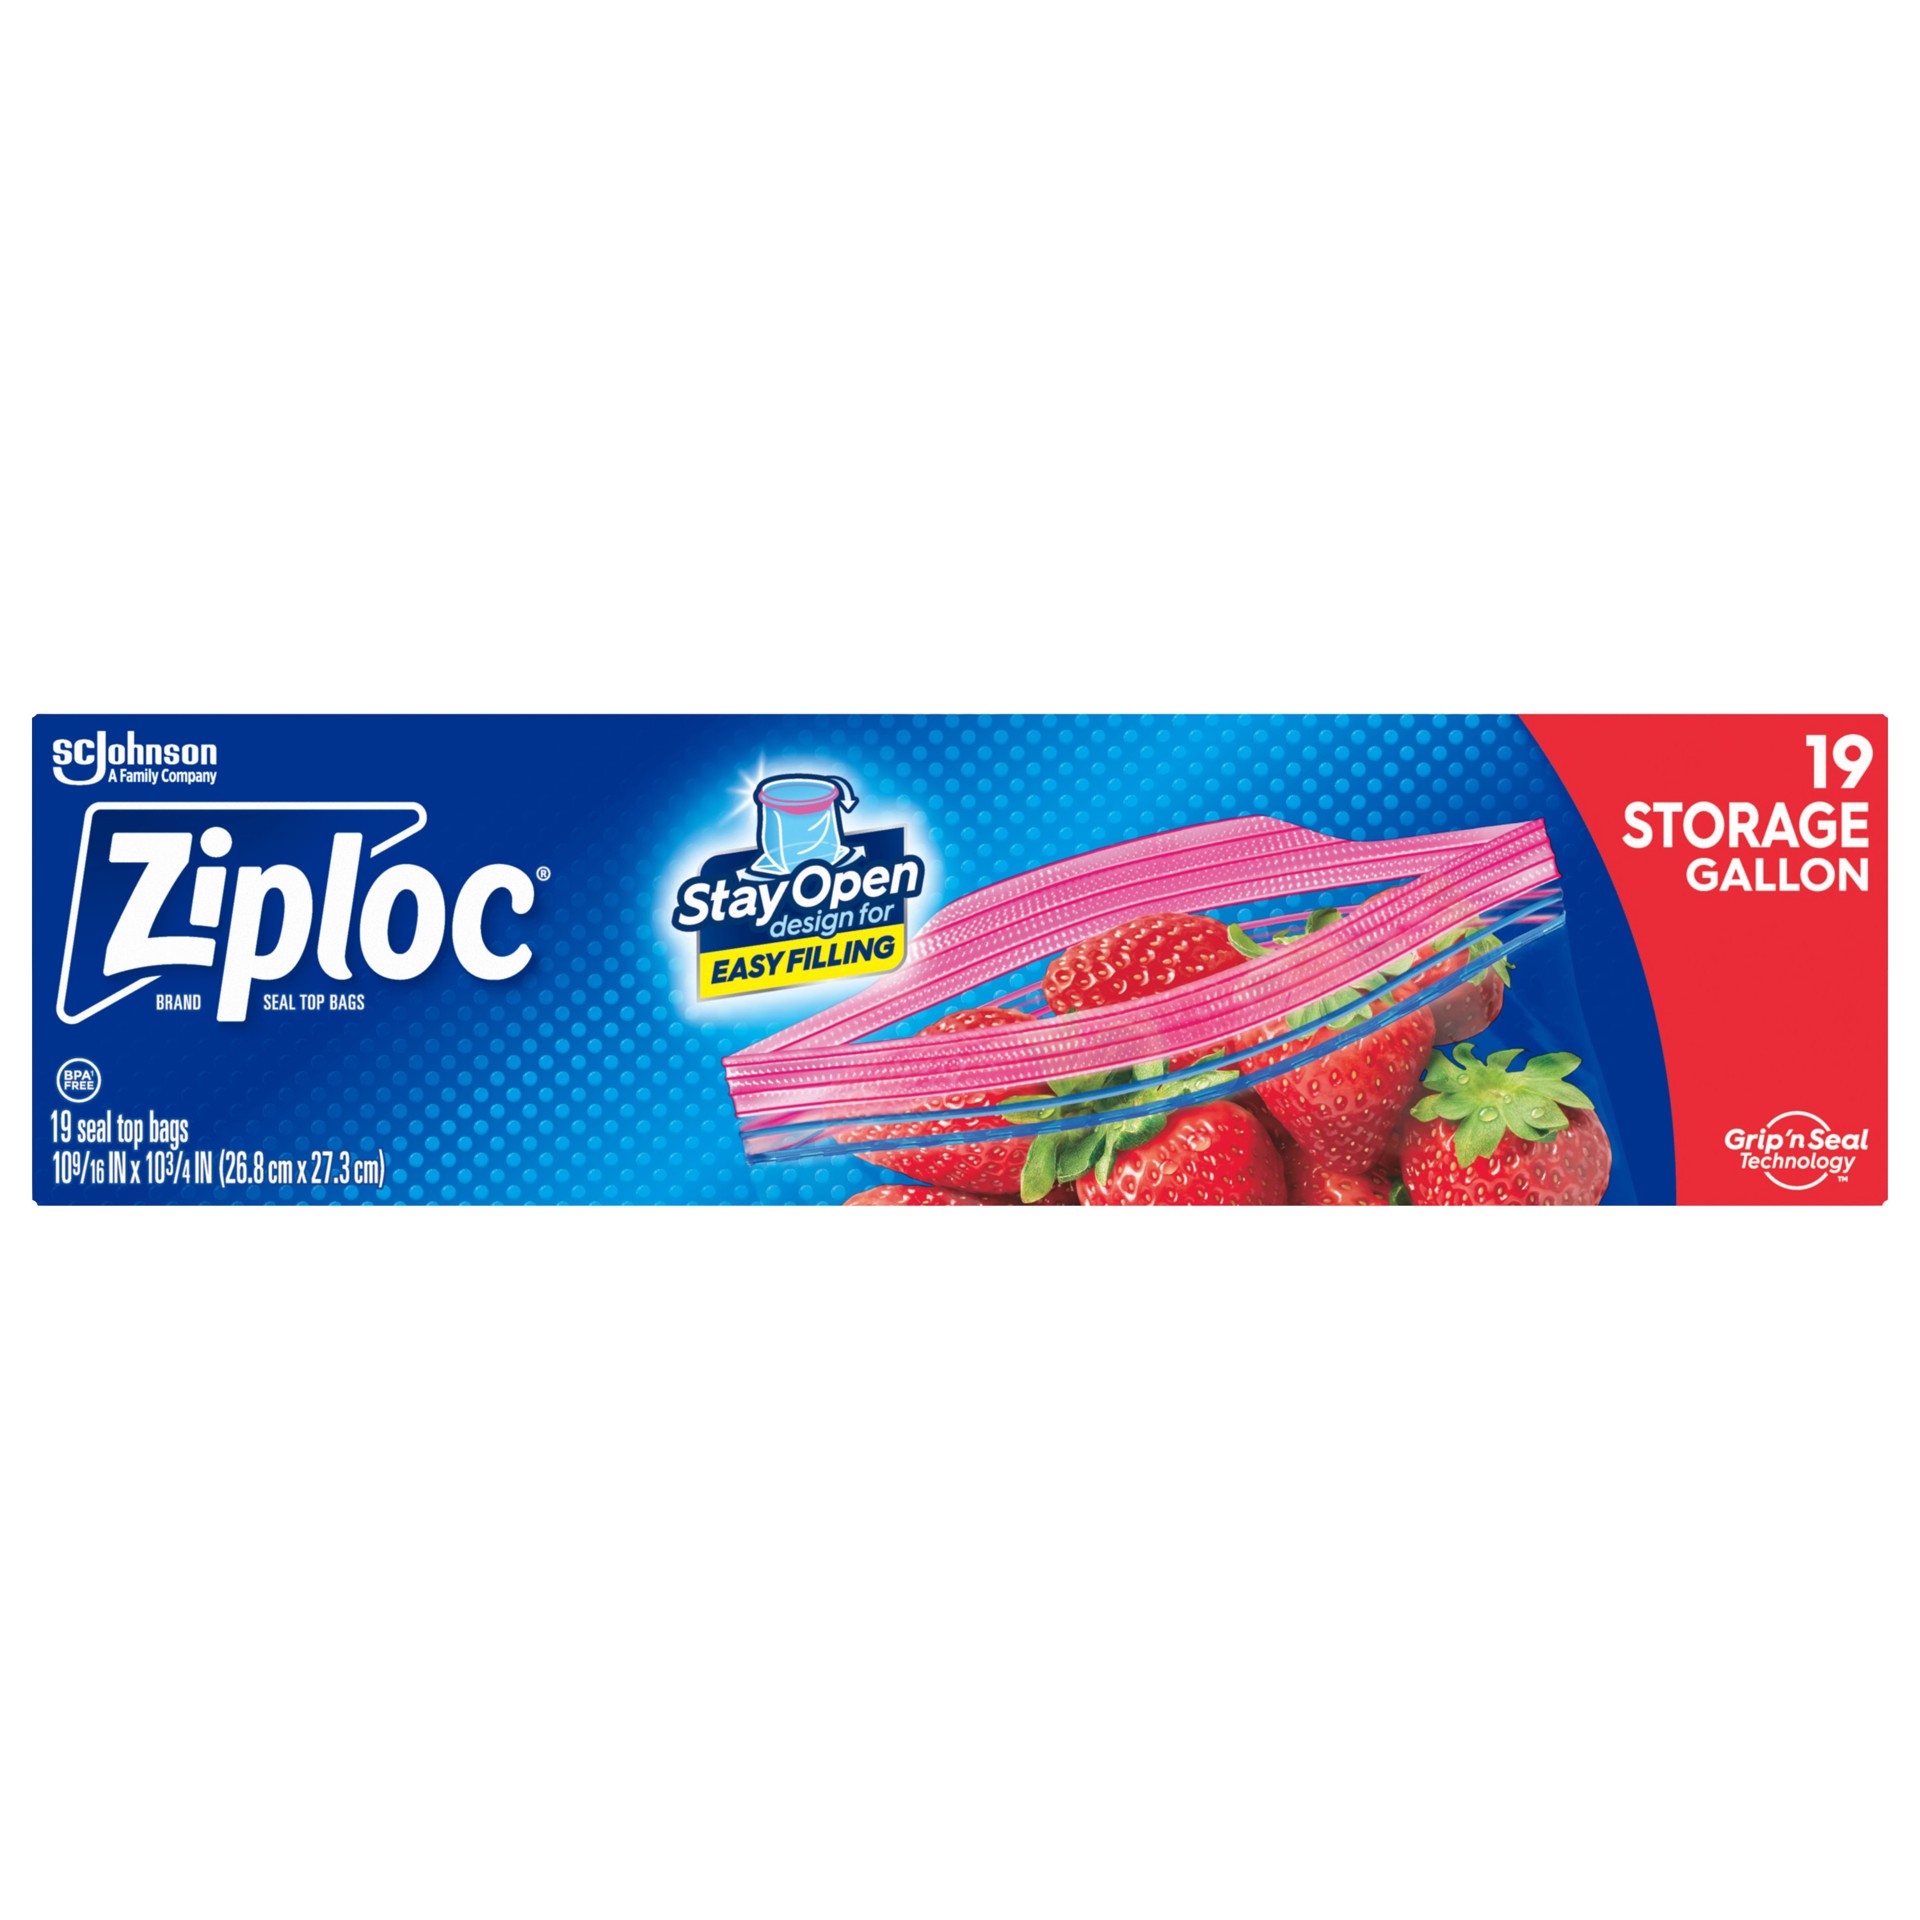 slide 1 of 5, Ziploc Brand Storage Bags with New Stay Open Design, Gallon, 19 Count, Patented Stand-up Bottom, Easy to Fill Food Storage Bags, Unloc a Free Set of Hands in the Kitchen, Microwave Safe, BPA Free, 19 ct